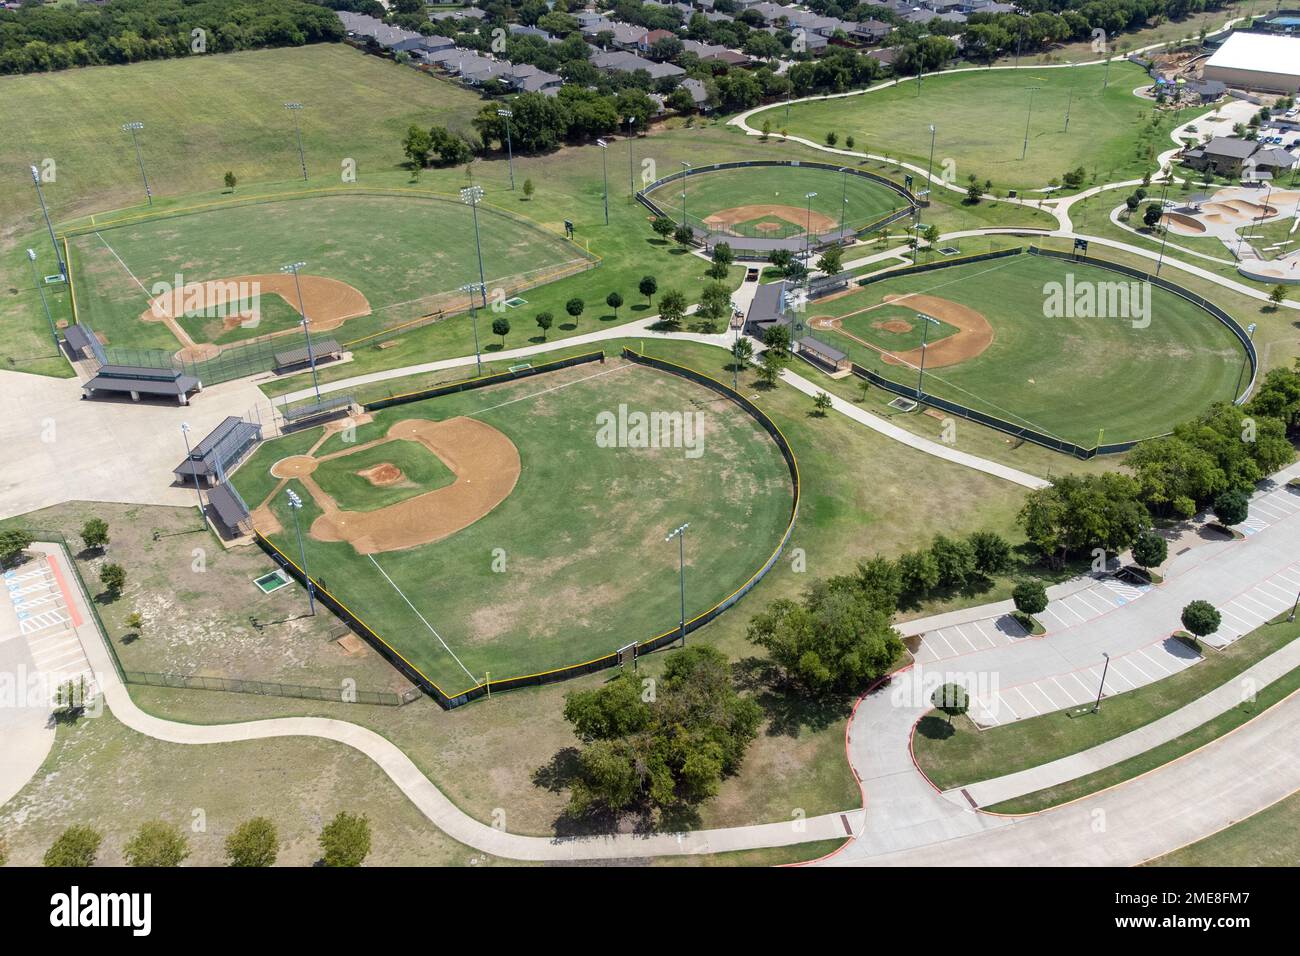 Aerial view a large baseball stadiums in the summertime Stock Photo